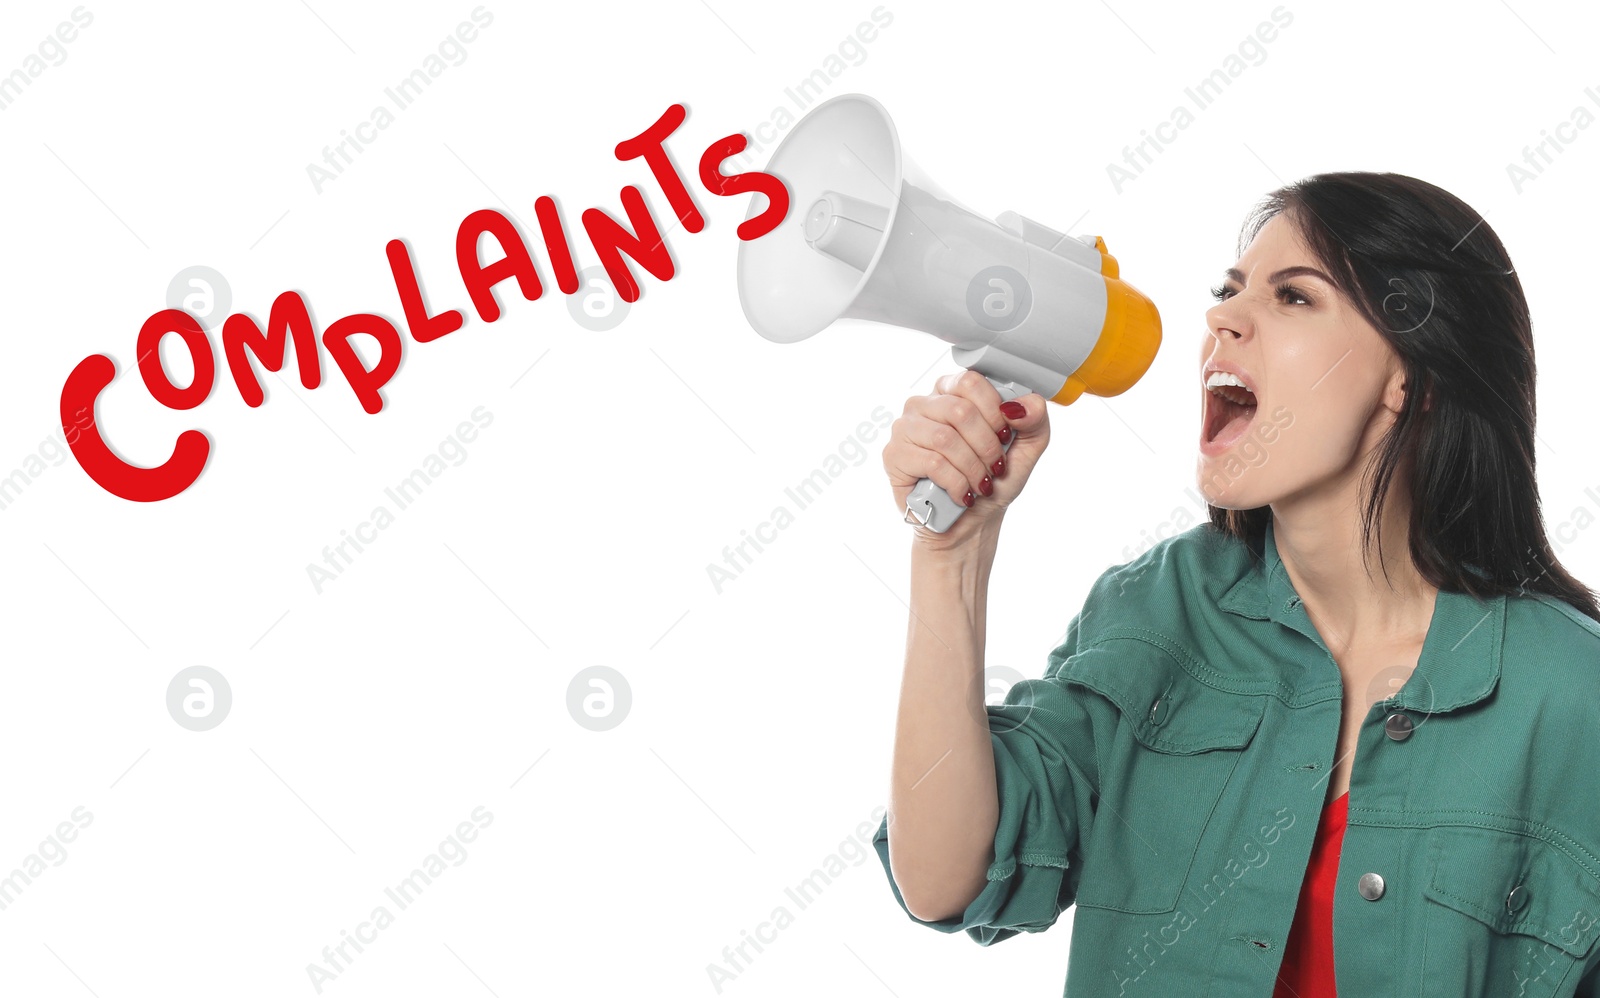 Image of Emotional woman with megaphone on white background. Word Complaints coming out from device